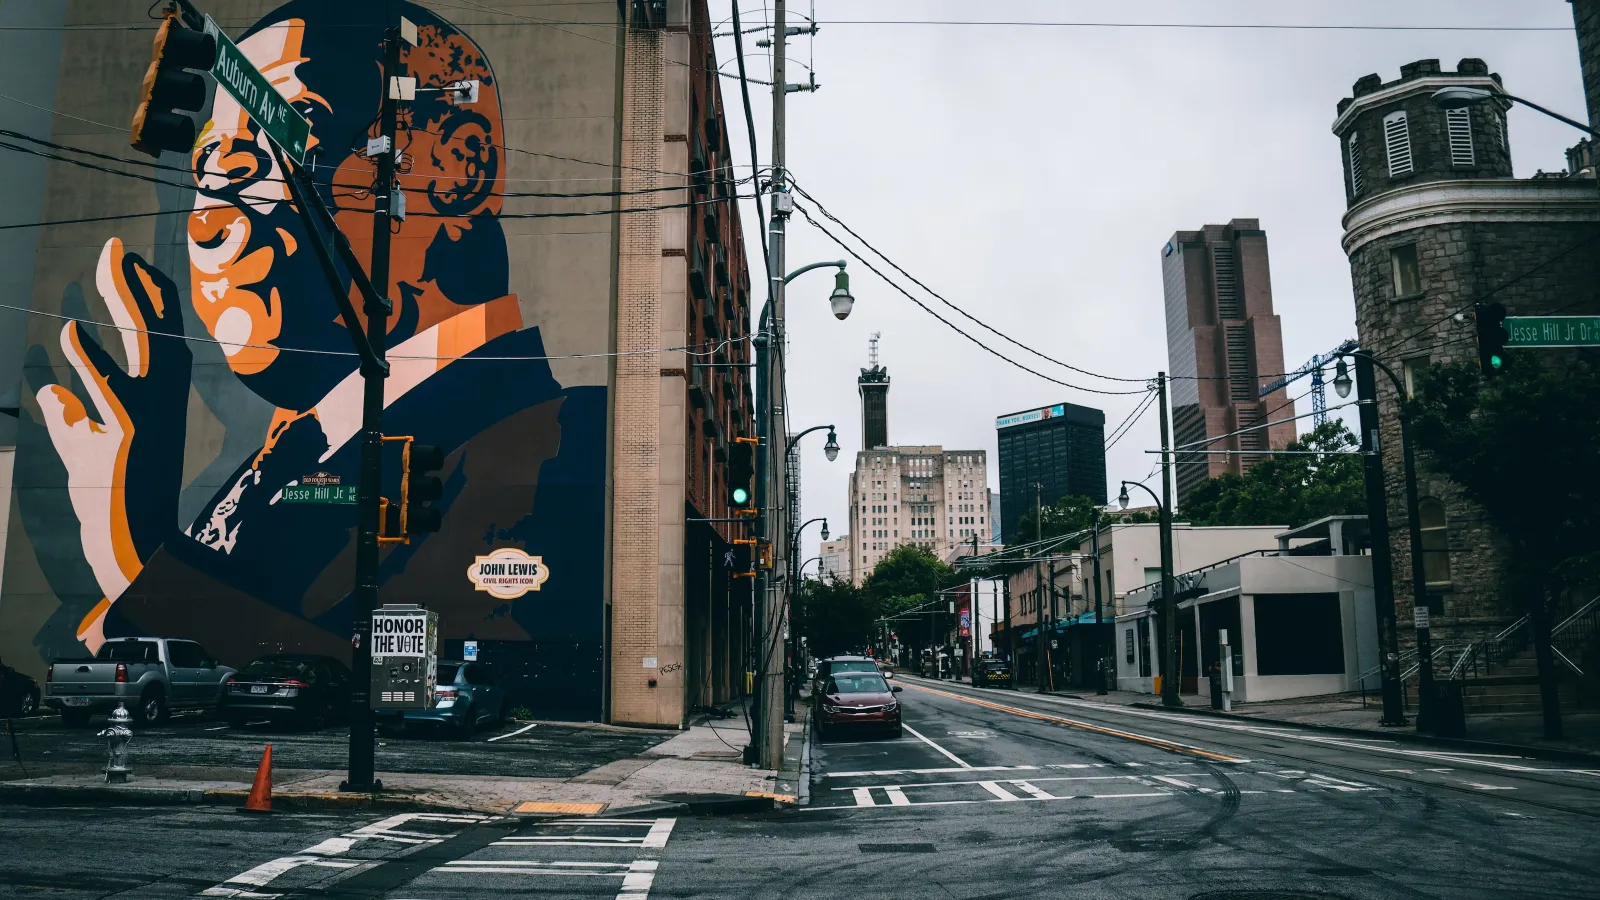 a street with a large mural on it